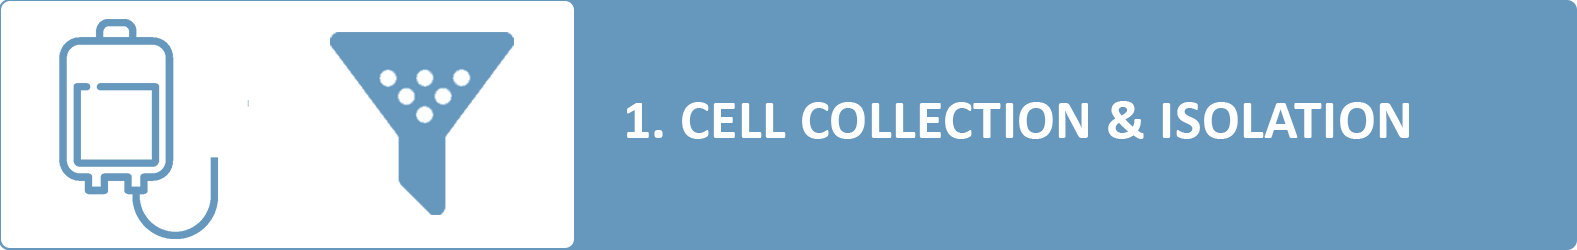 Cell collection & isolation